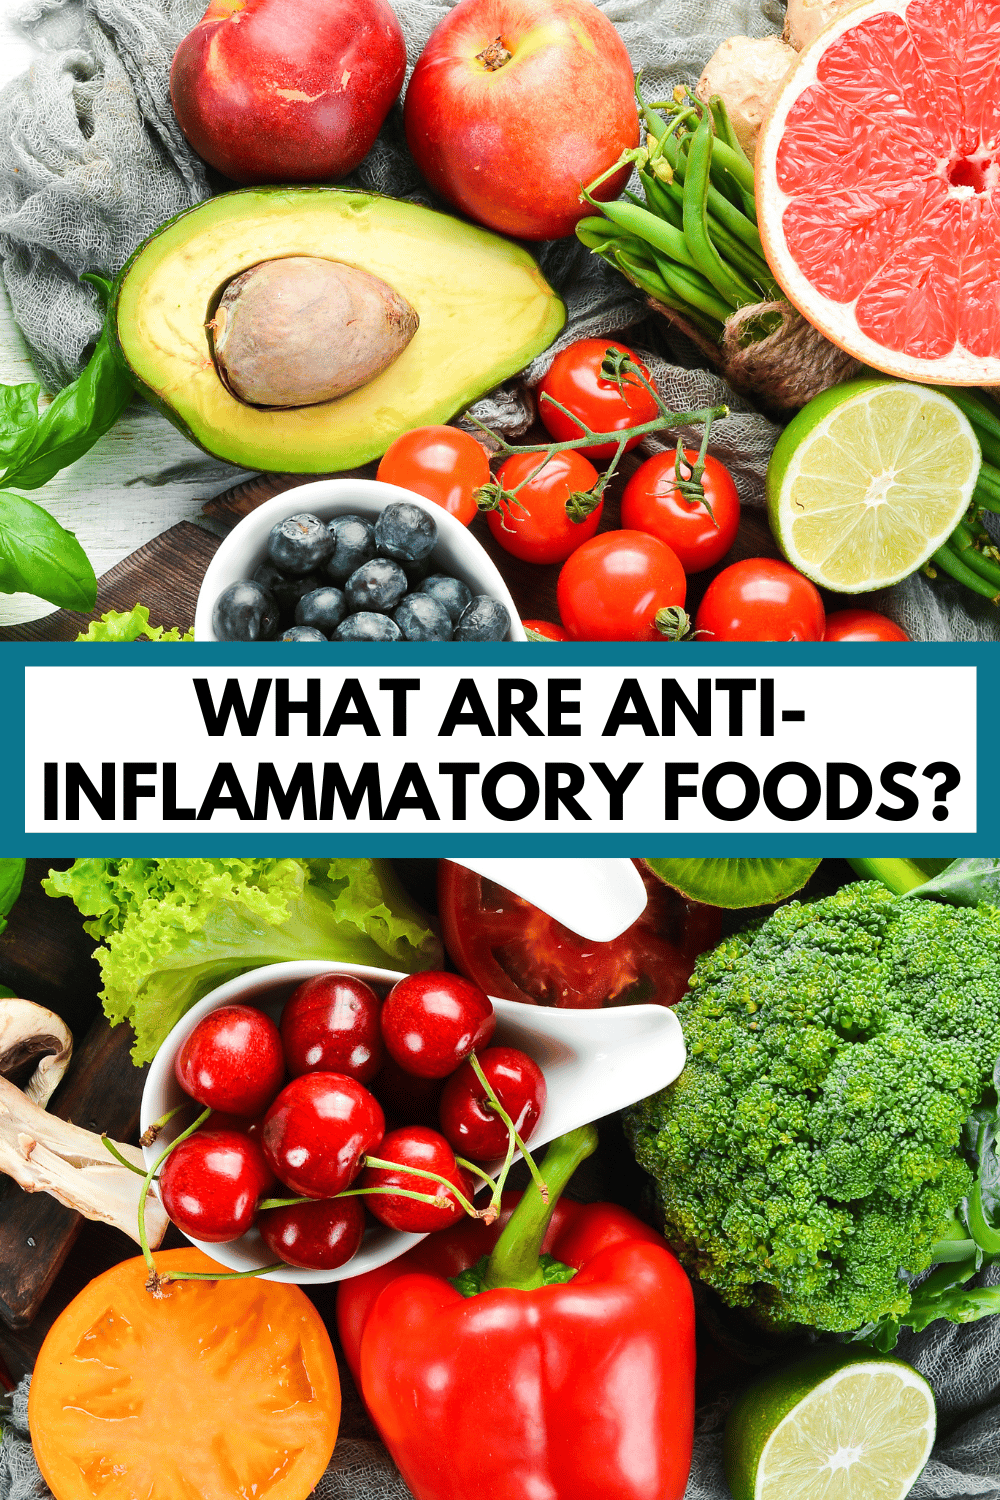 various colorful fruits and vegetables with text overlay, "What are anti-inflammatory foods?"